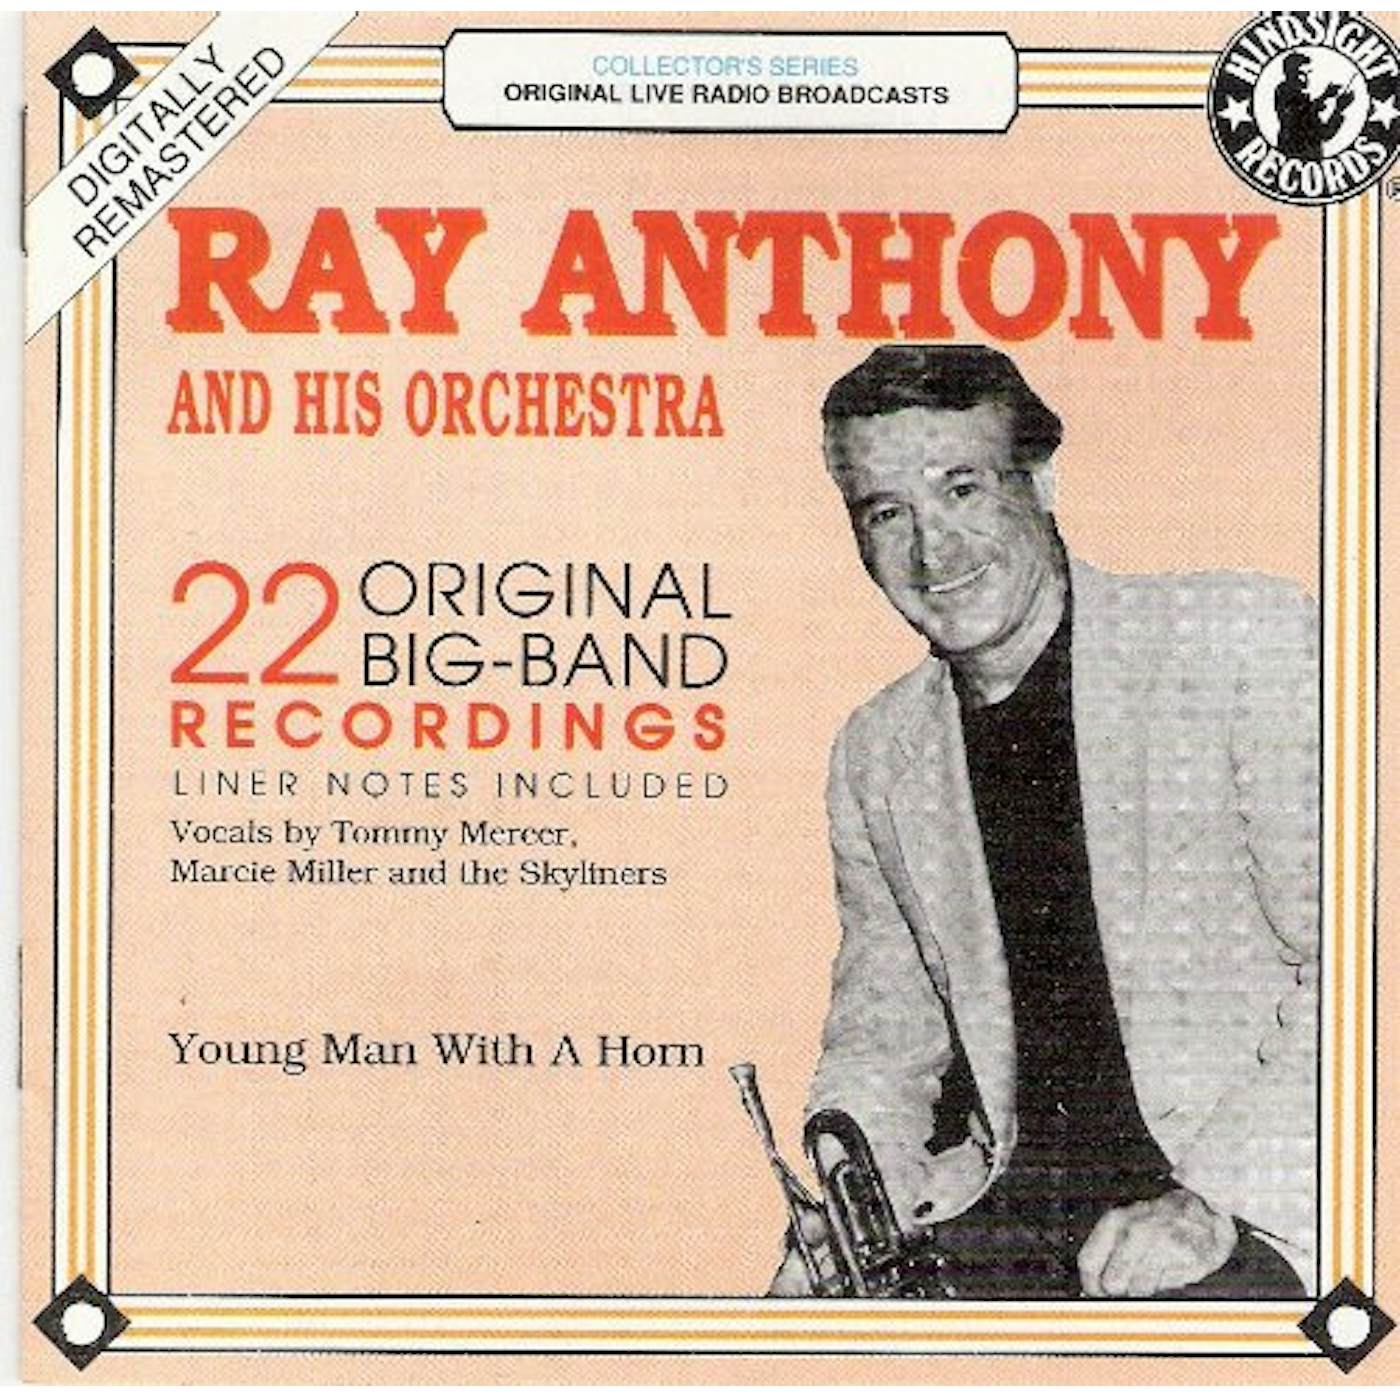 Ray Anthony YOUNG MAN WITH A HORN-1952-54 CD